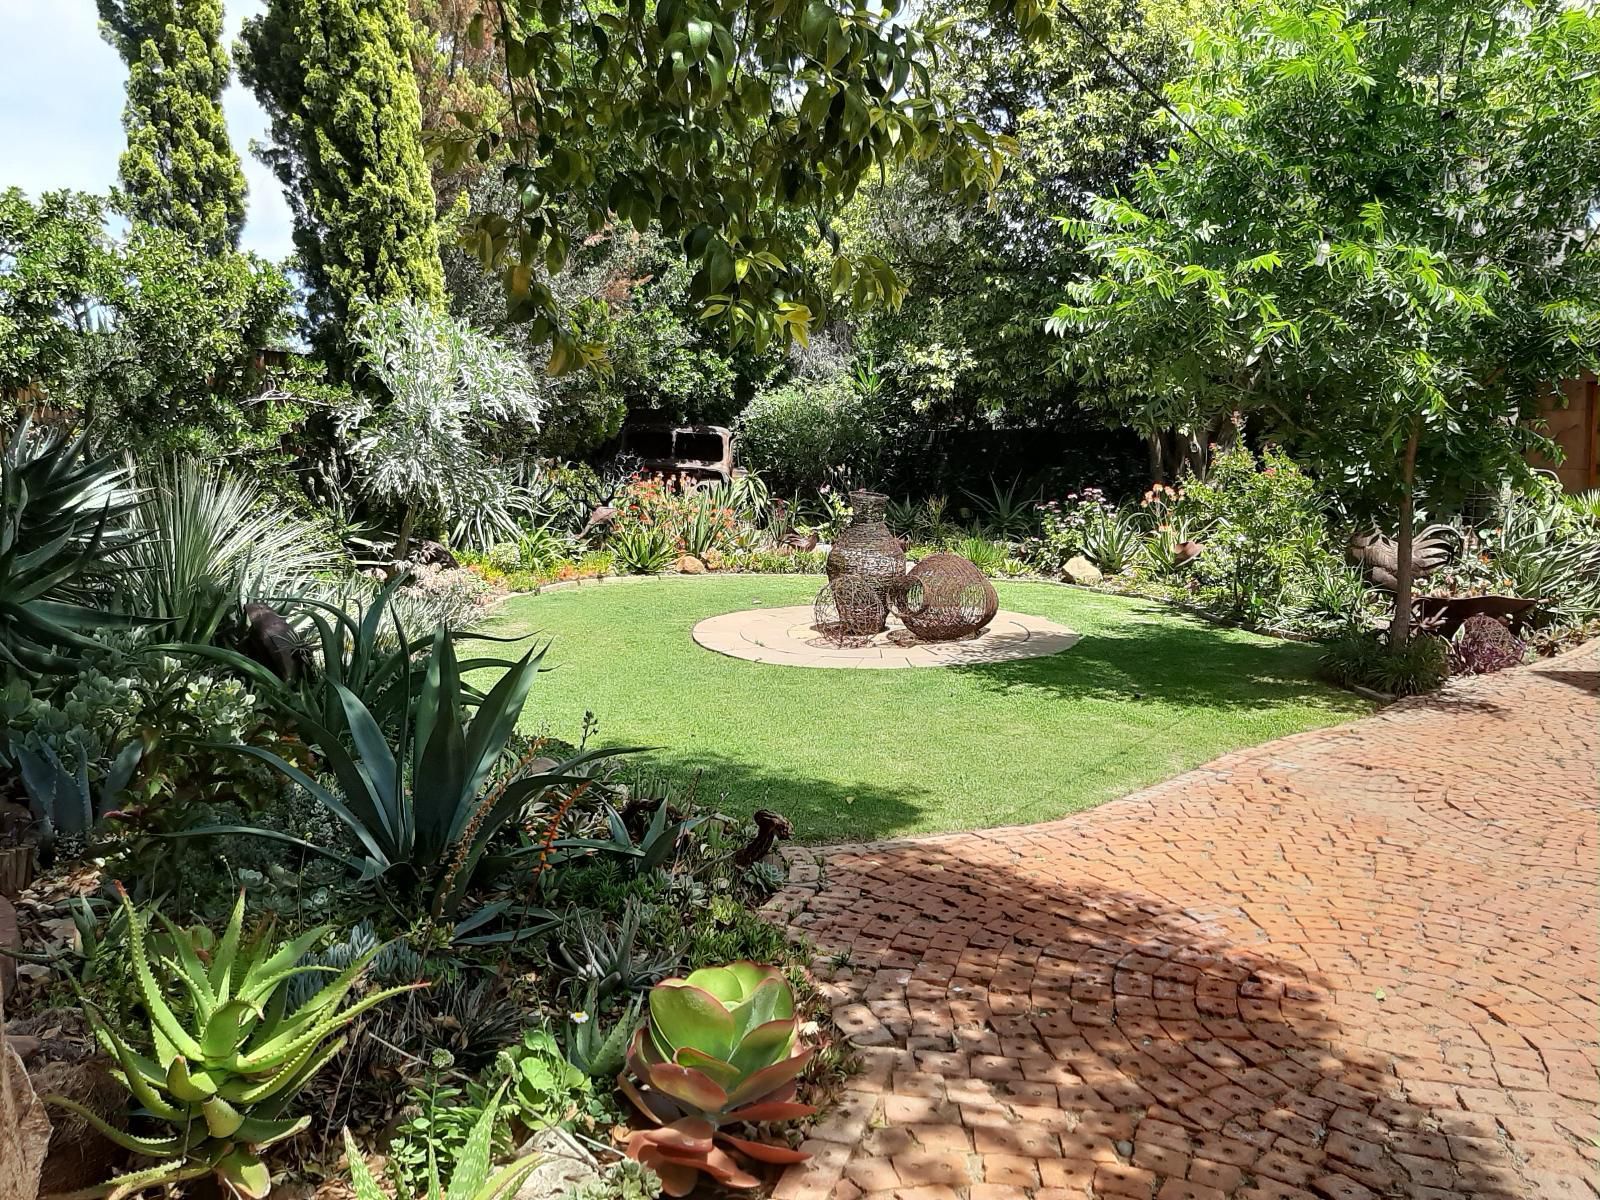 Rustic Forest Guest House Dan Pienaar Bloemfontein Free State South Africa Palm Tree, Plant, Nature, Wood, Garden